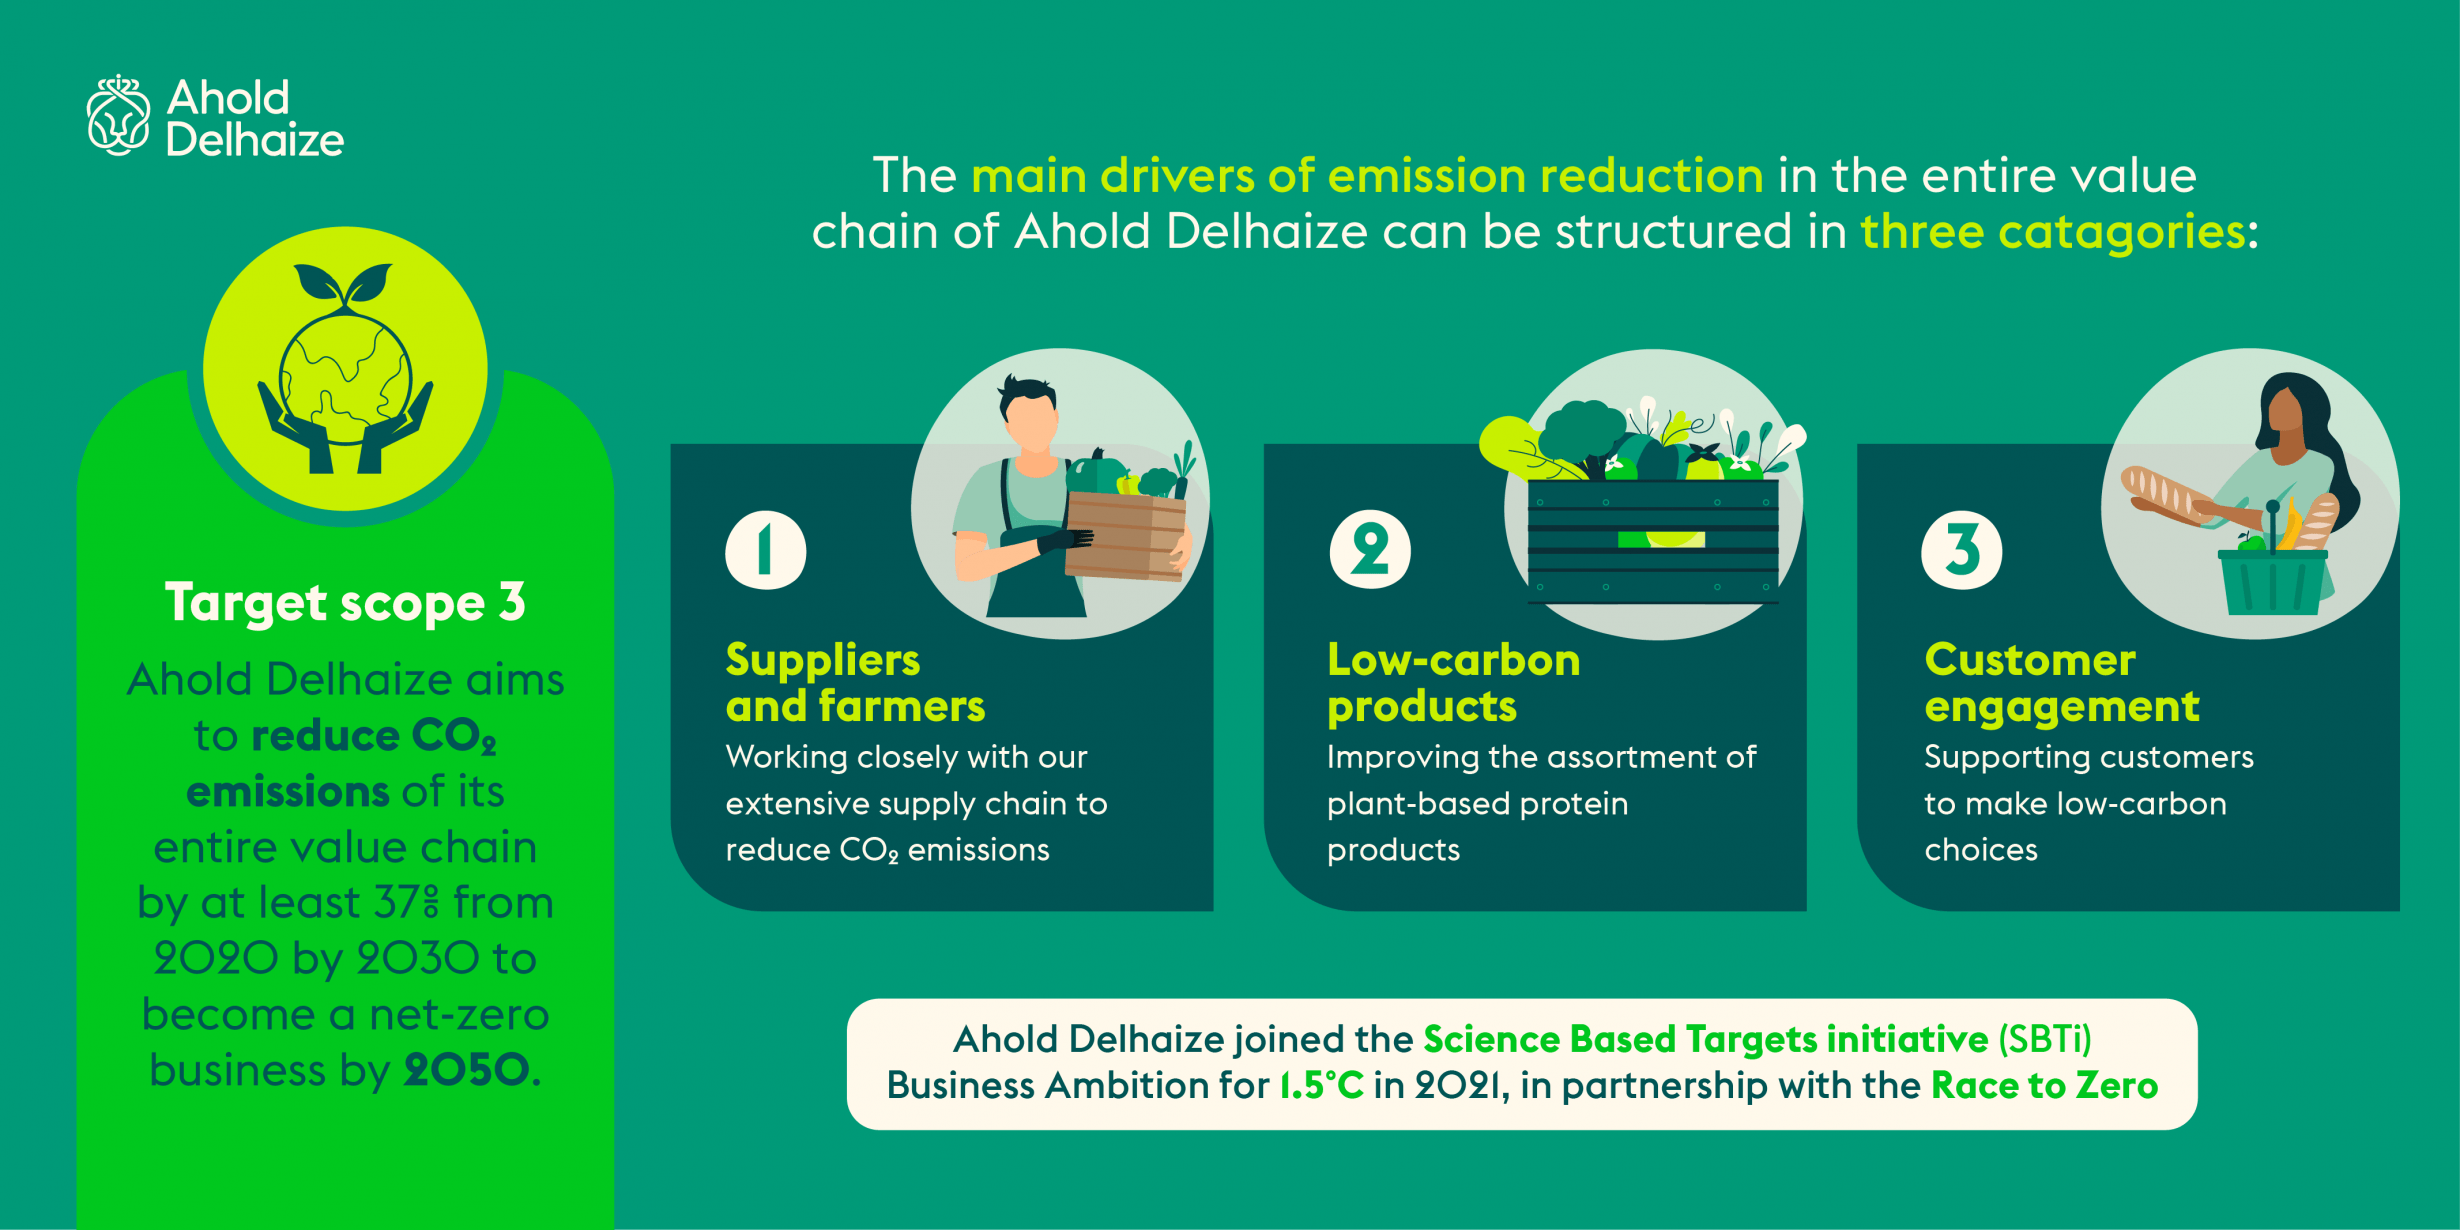 In accordance with the UN aim of limiting global warming to 1.5°C, Ahold Delhaize updates its CO2 emissions reduction targets across its whole value chain.